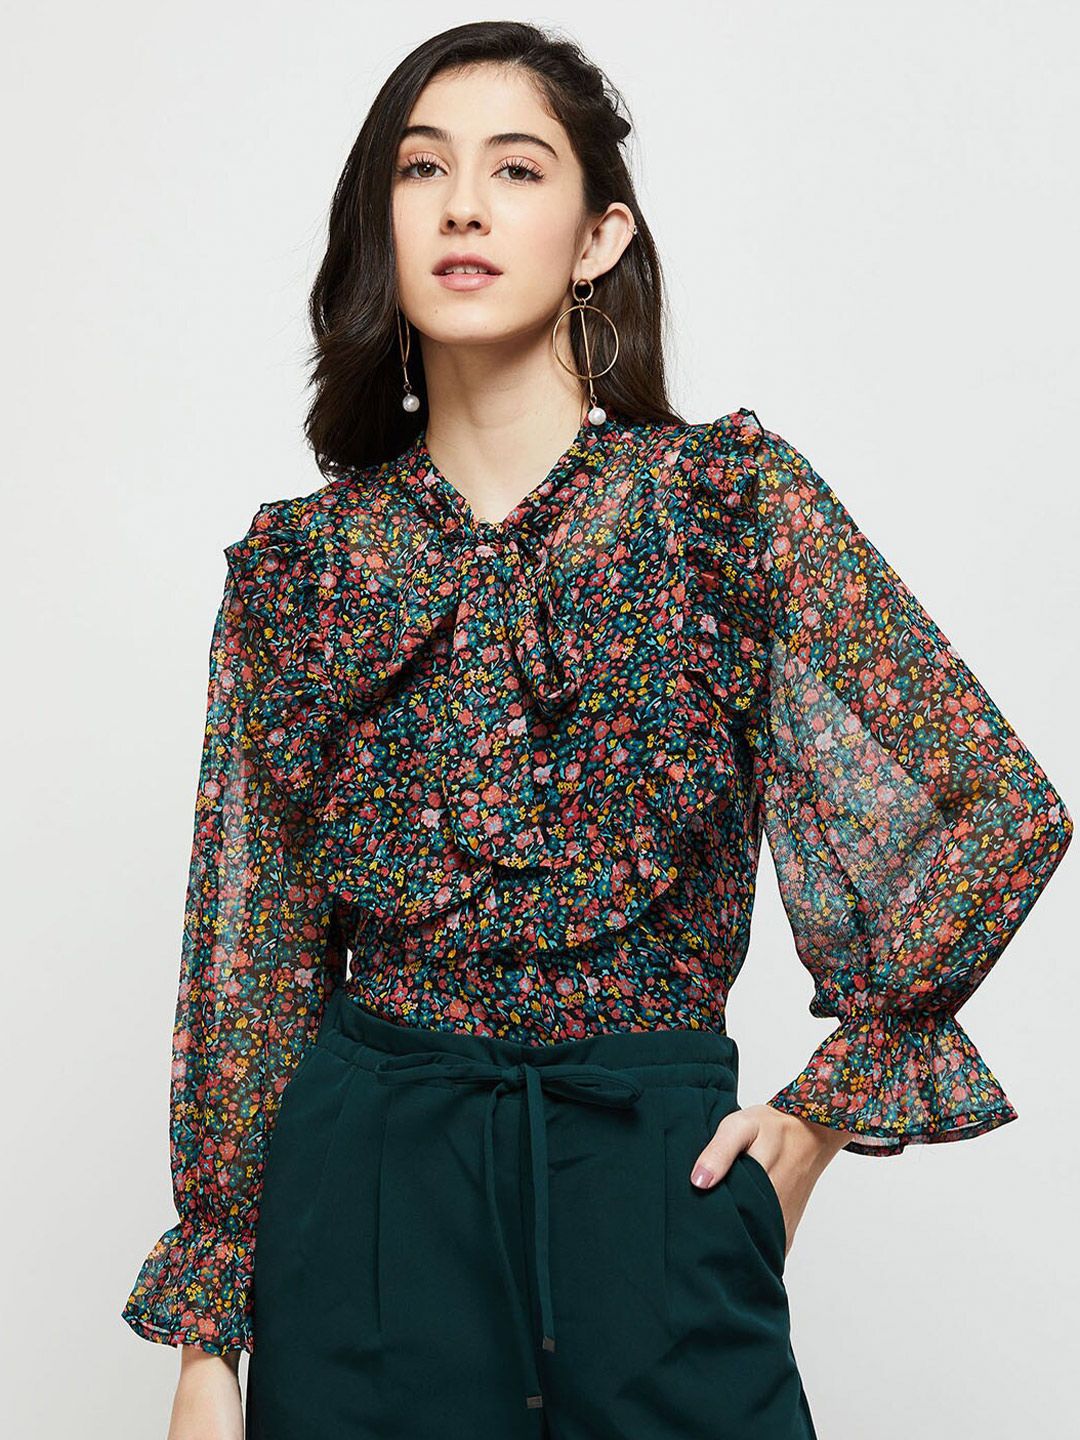 max Black Floral Print Tie-Up Neck Ruffles Top Price in India